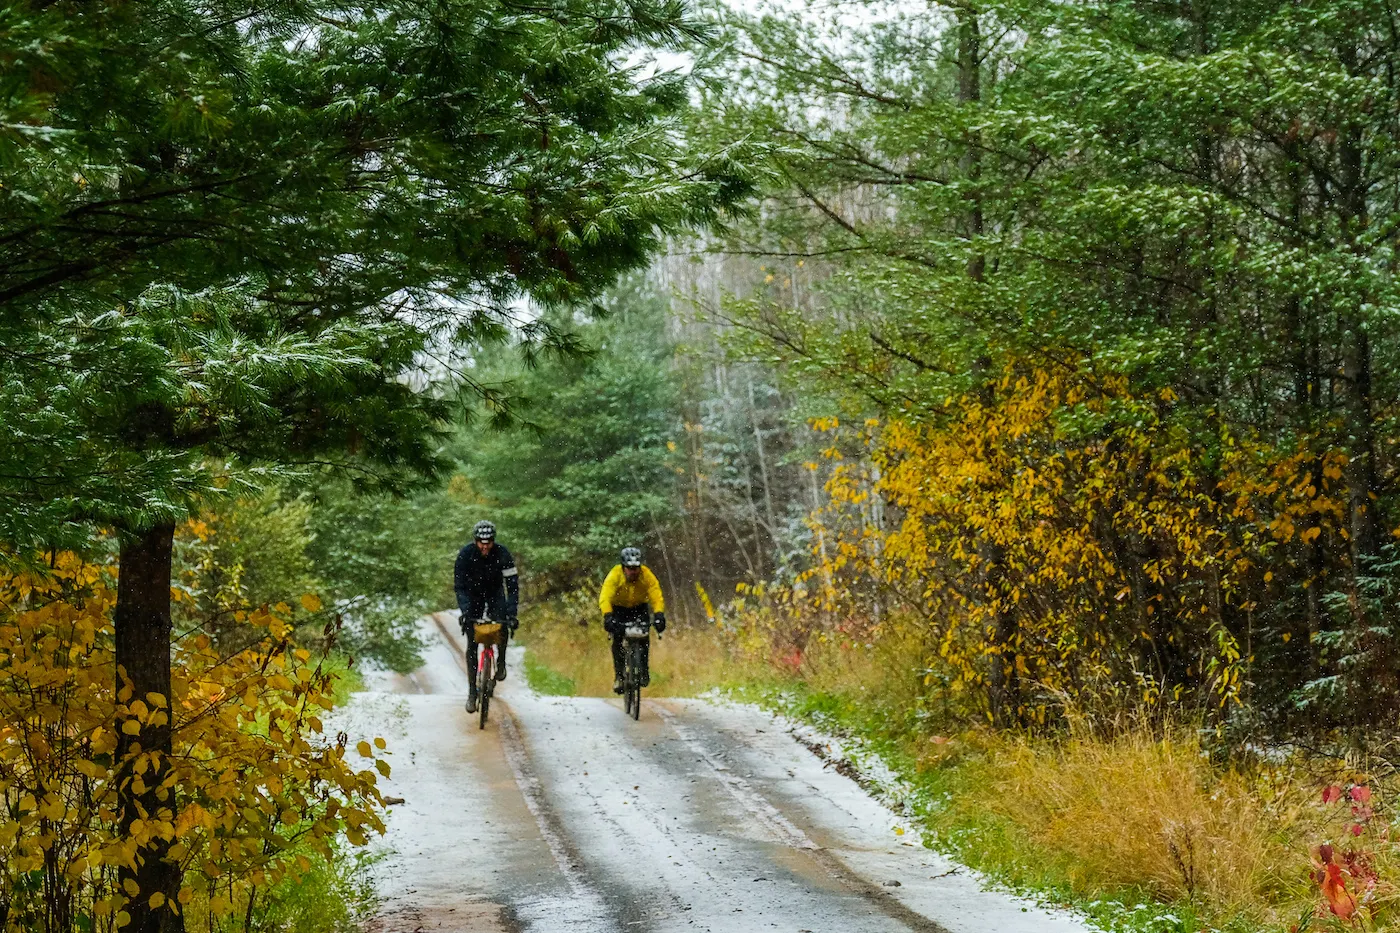 Bikepacking Roots Releases the 600-Mile Northwoods Route, of which Otso Cycles is a presenting sponsor.